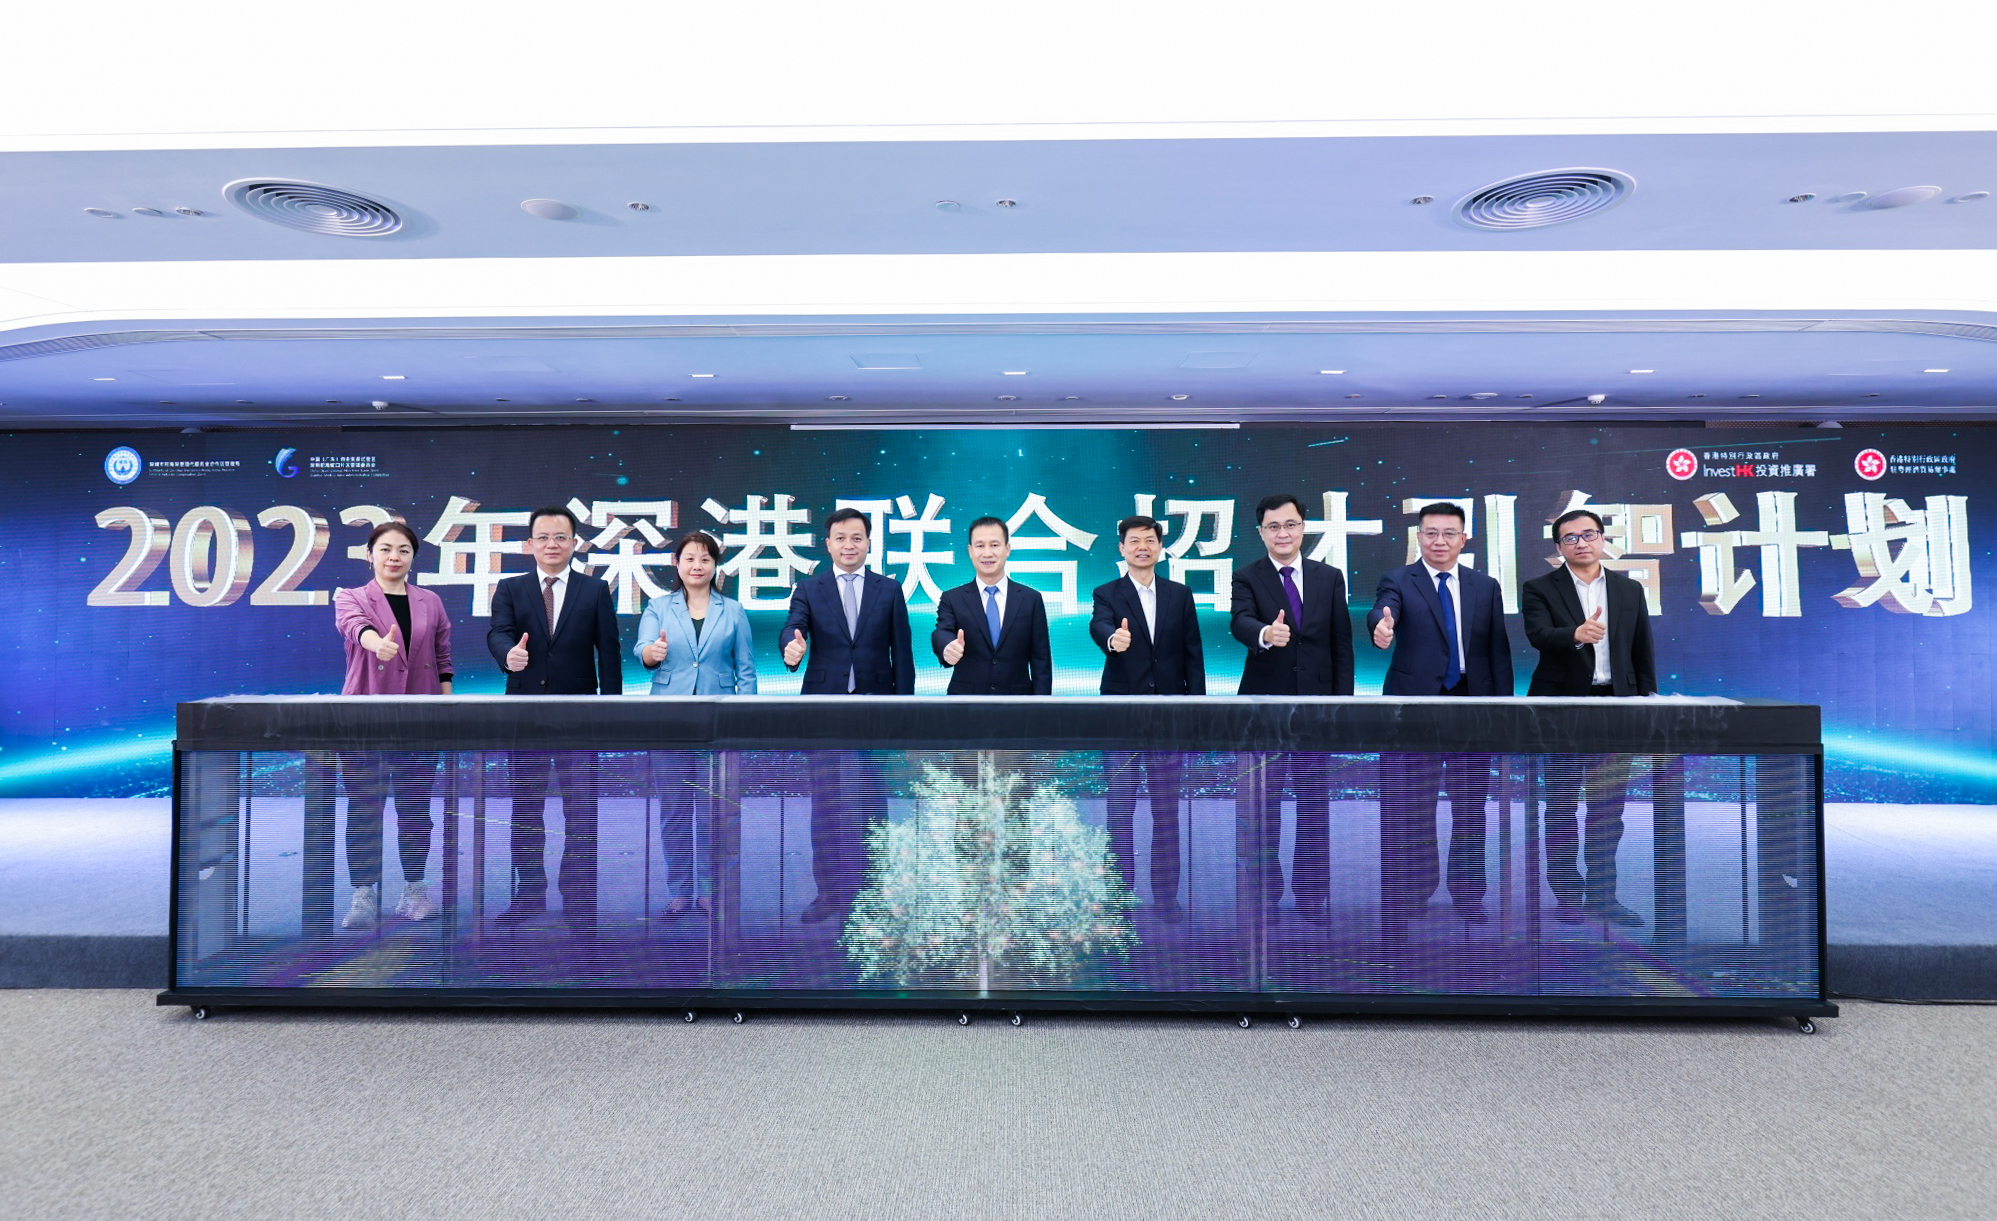 Hong Kong Economic and Trade Office in Guangdong and the Shenzhen Qianhai Authority Announced the 